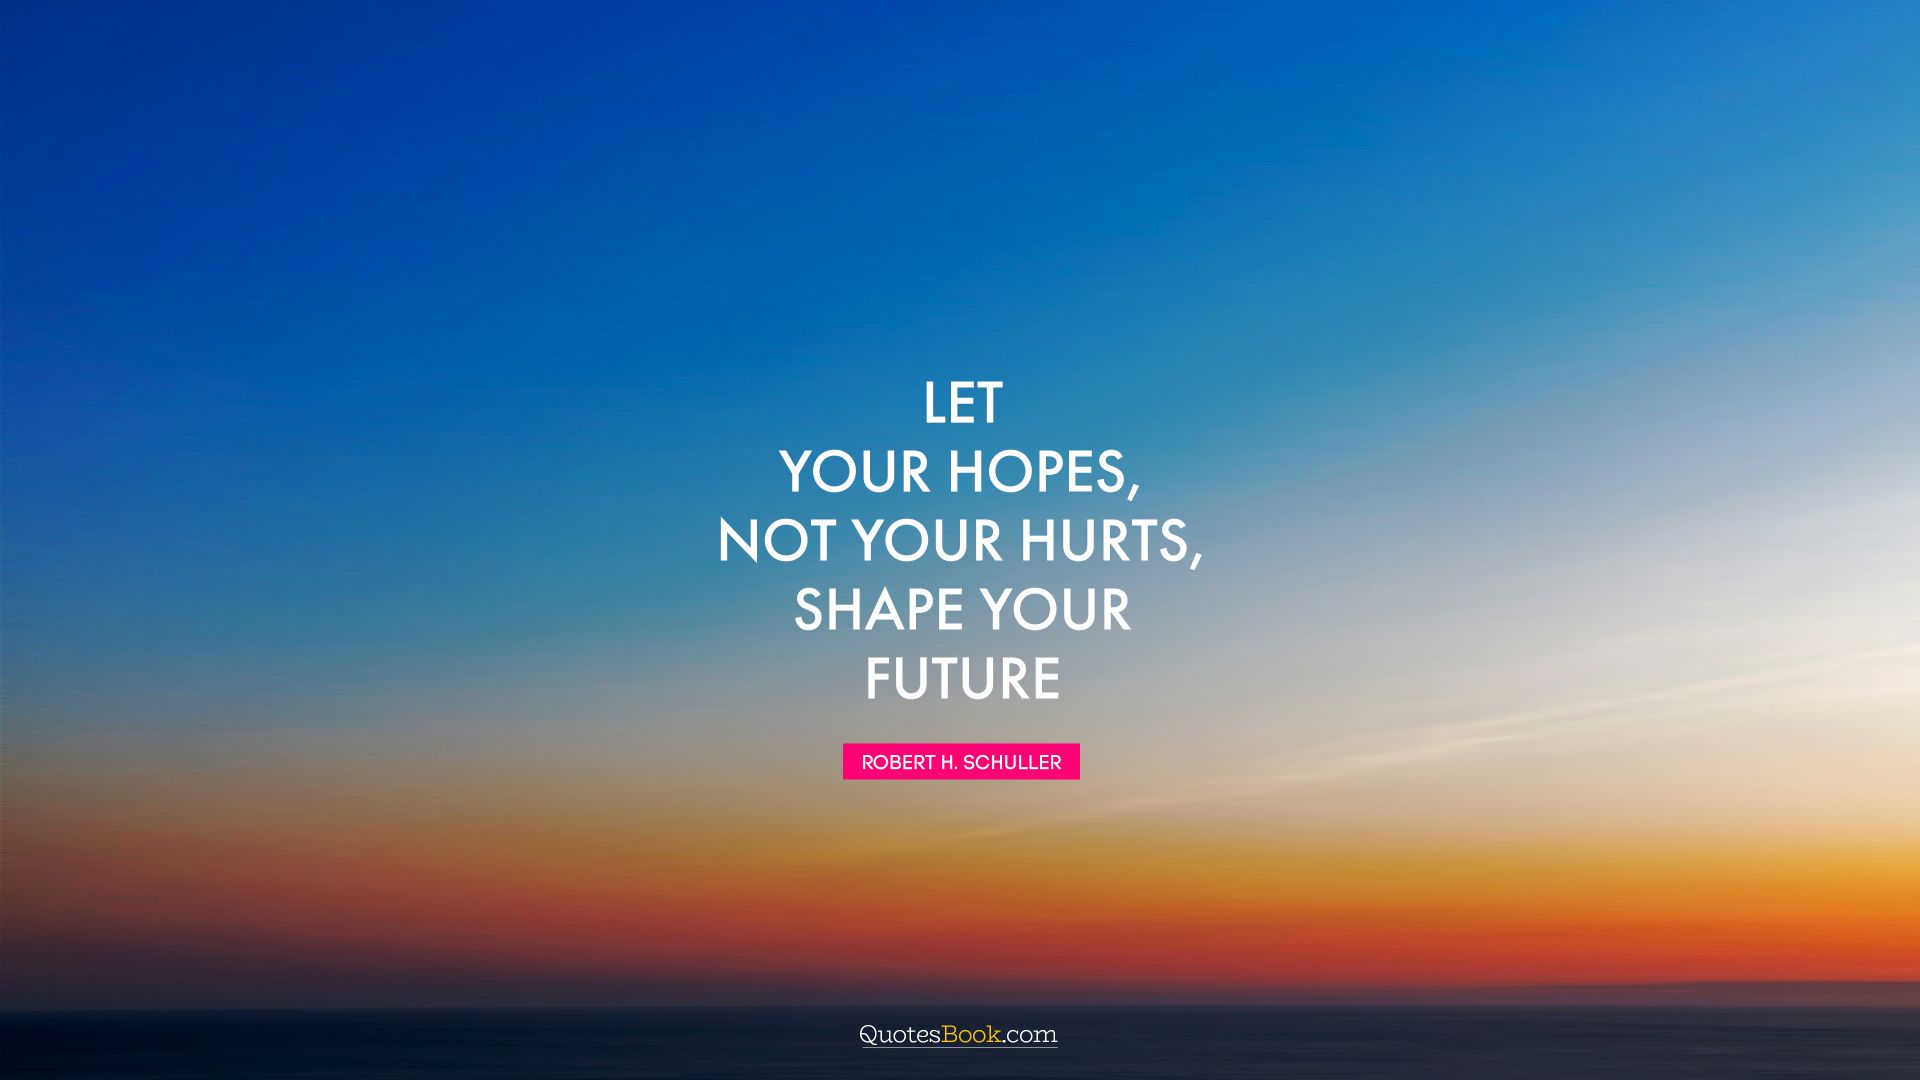 Let your hopes, not your hurts, shape your future. - Quote by Robert H. Schuller